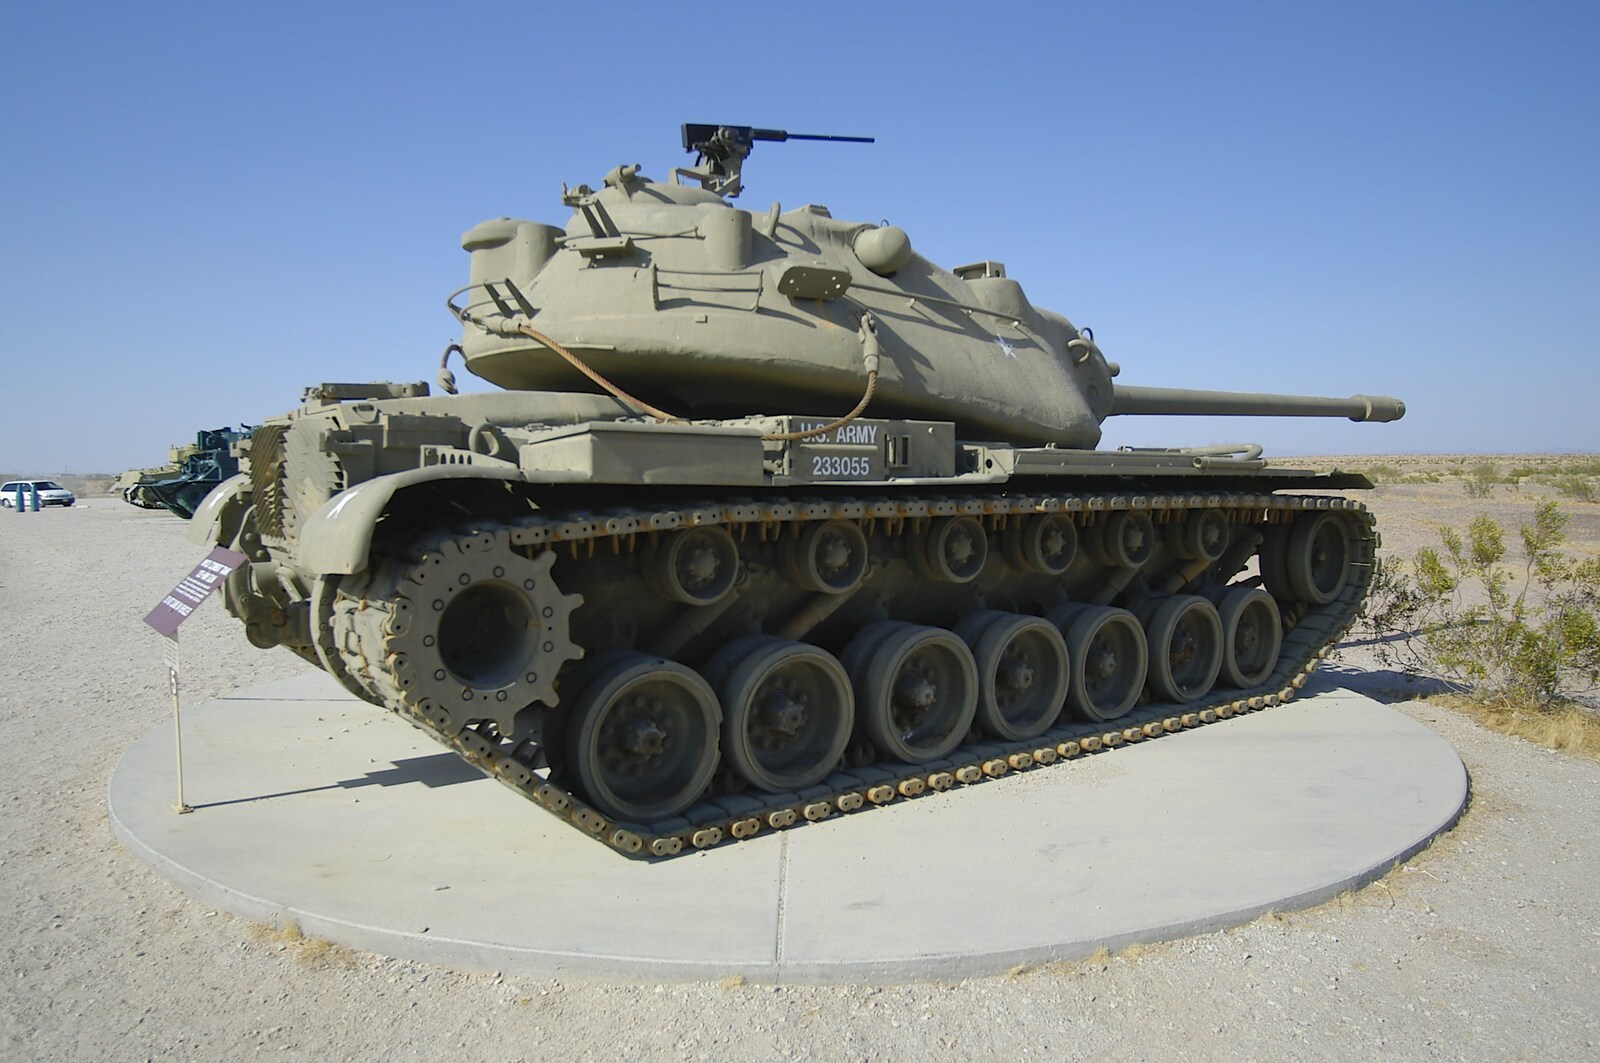 An M103 combat tank with a 120mm gun from San Diego Seven: The Desert and the Dunes, Arizona and California, US - 22nd April